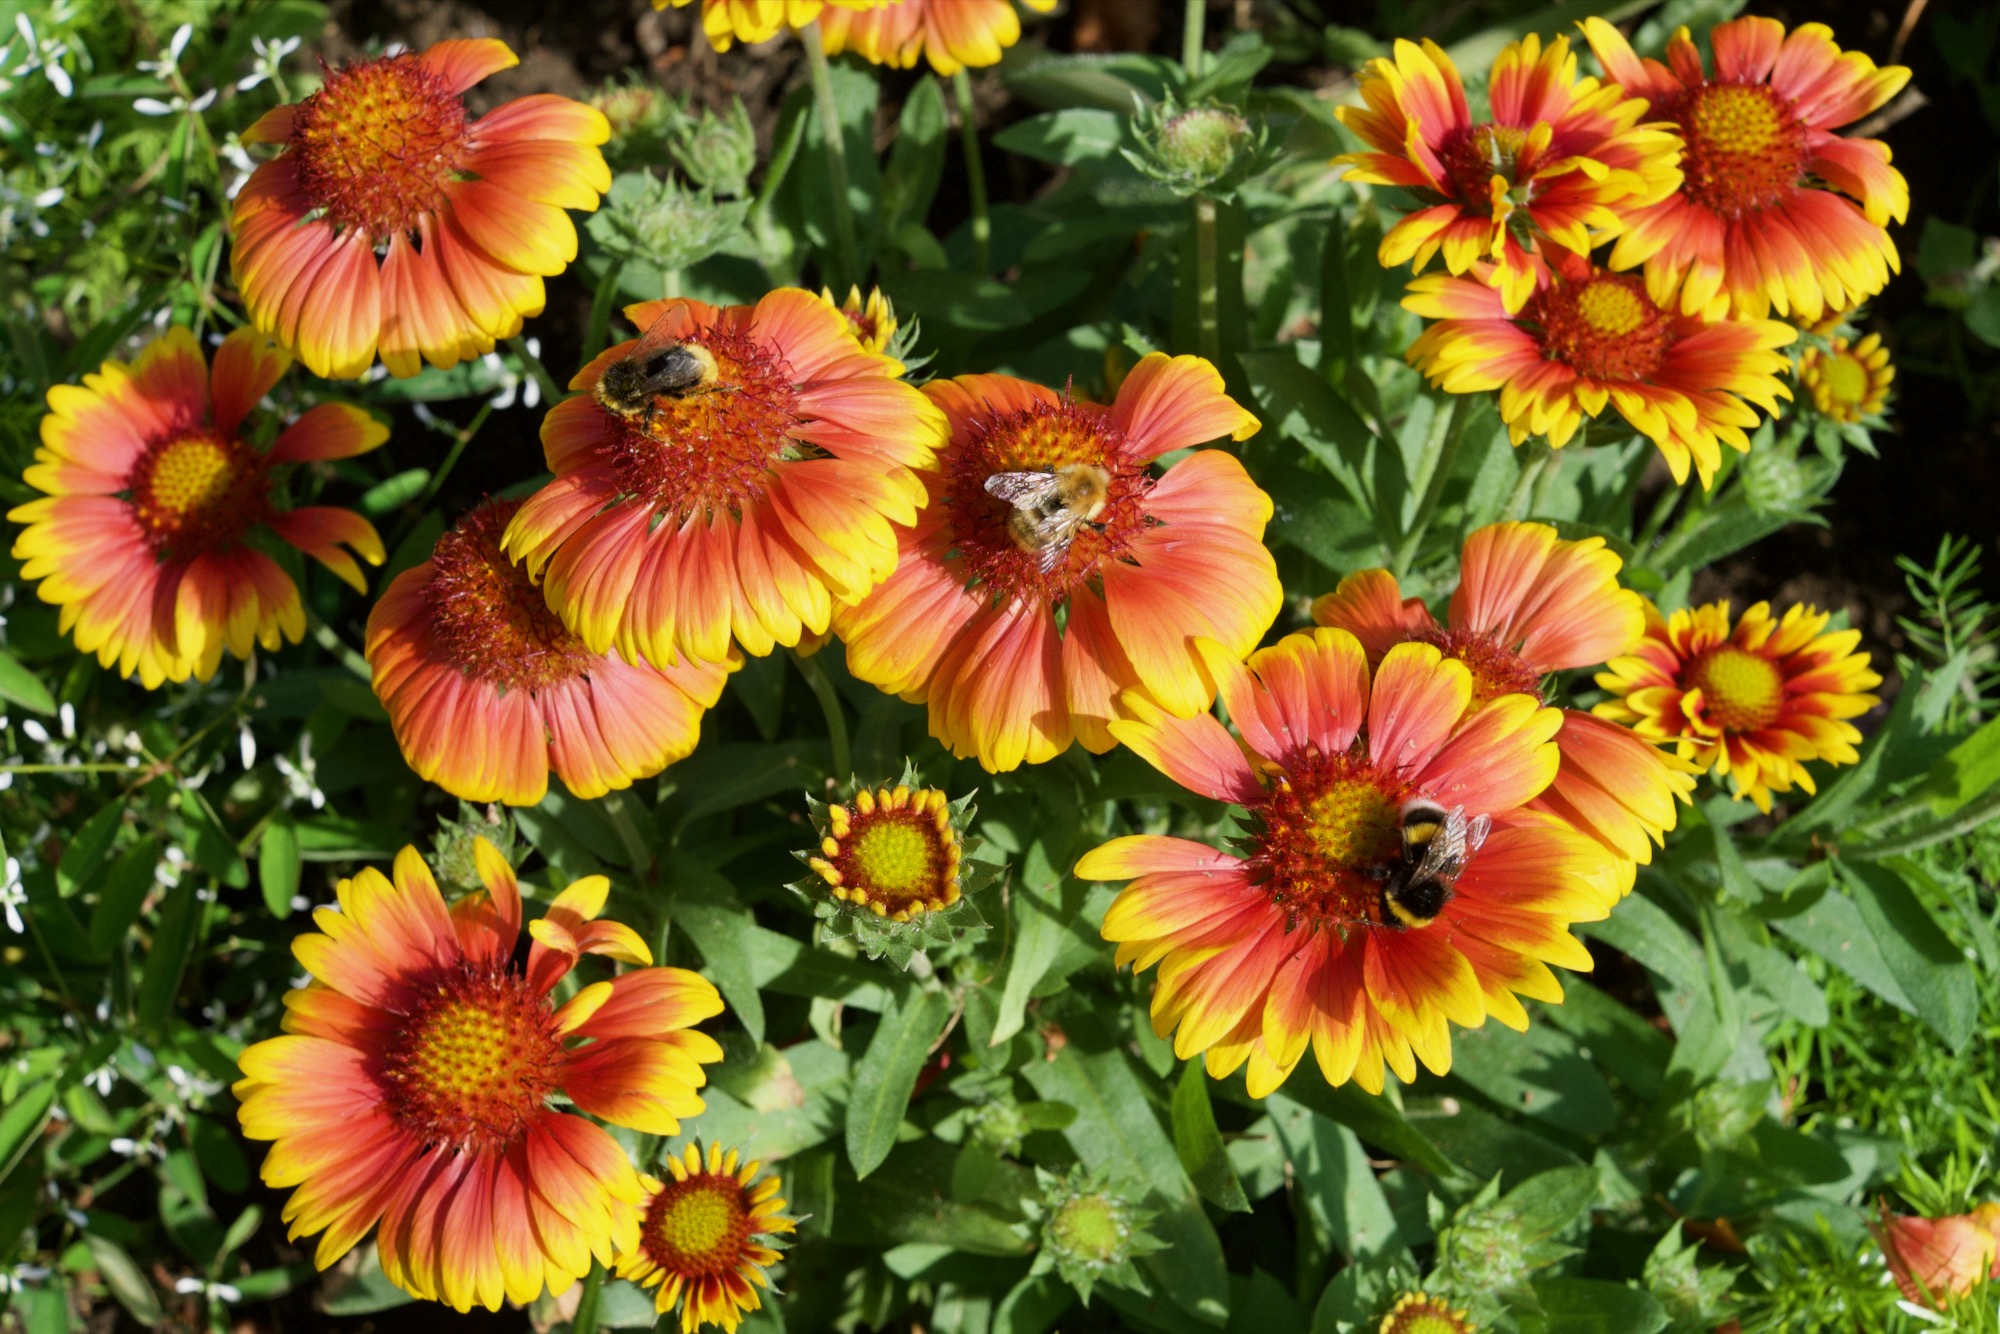 Bees on red and yellow flowers